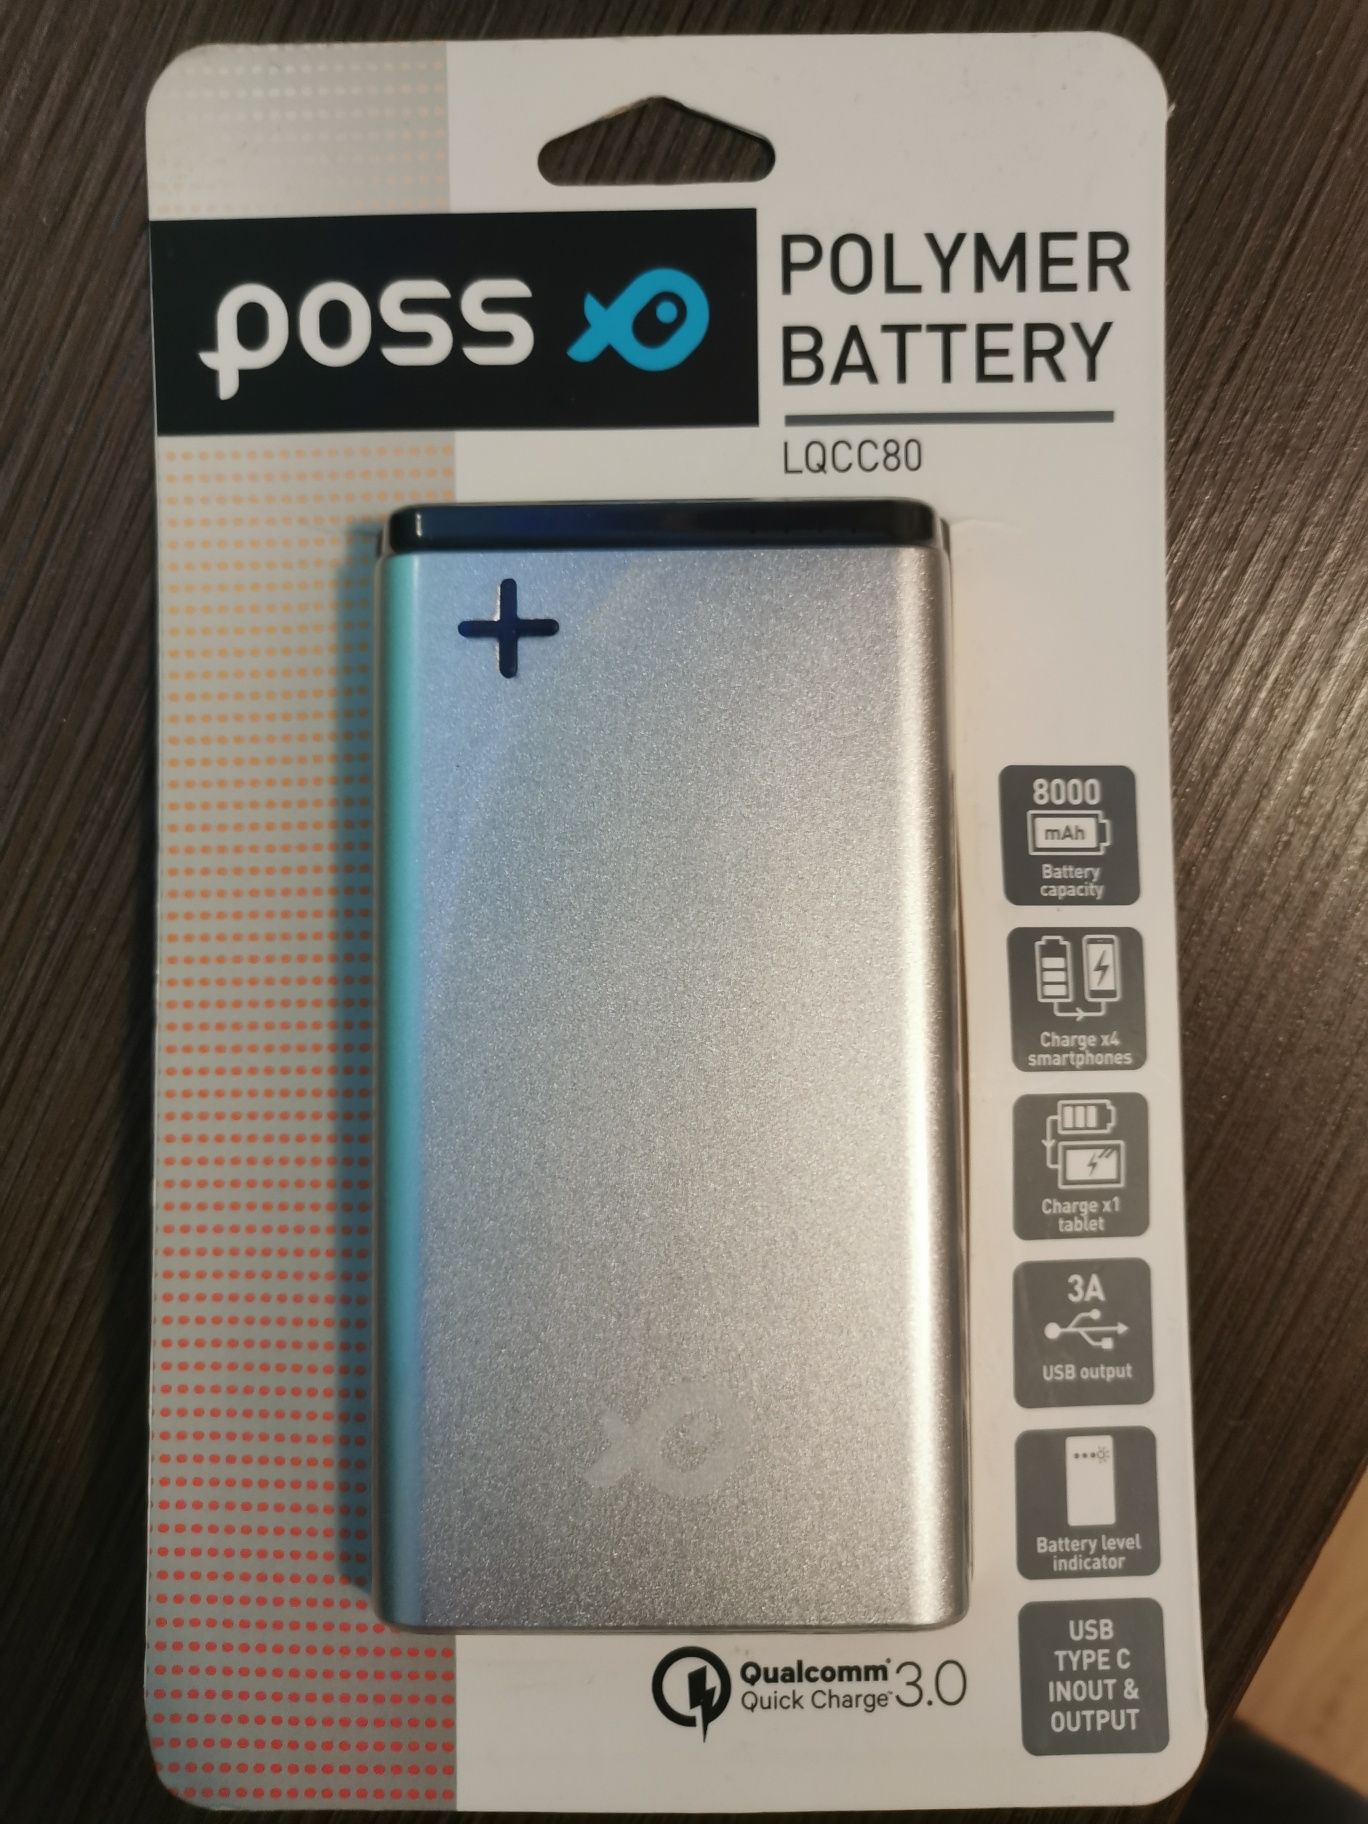 Power bank baterie externa Poss 8000mah type c in/out,qc 3.0.